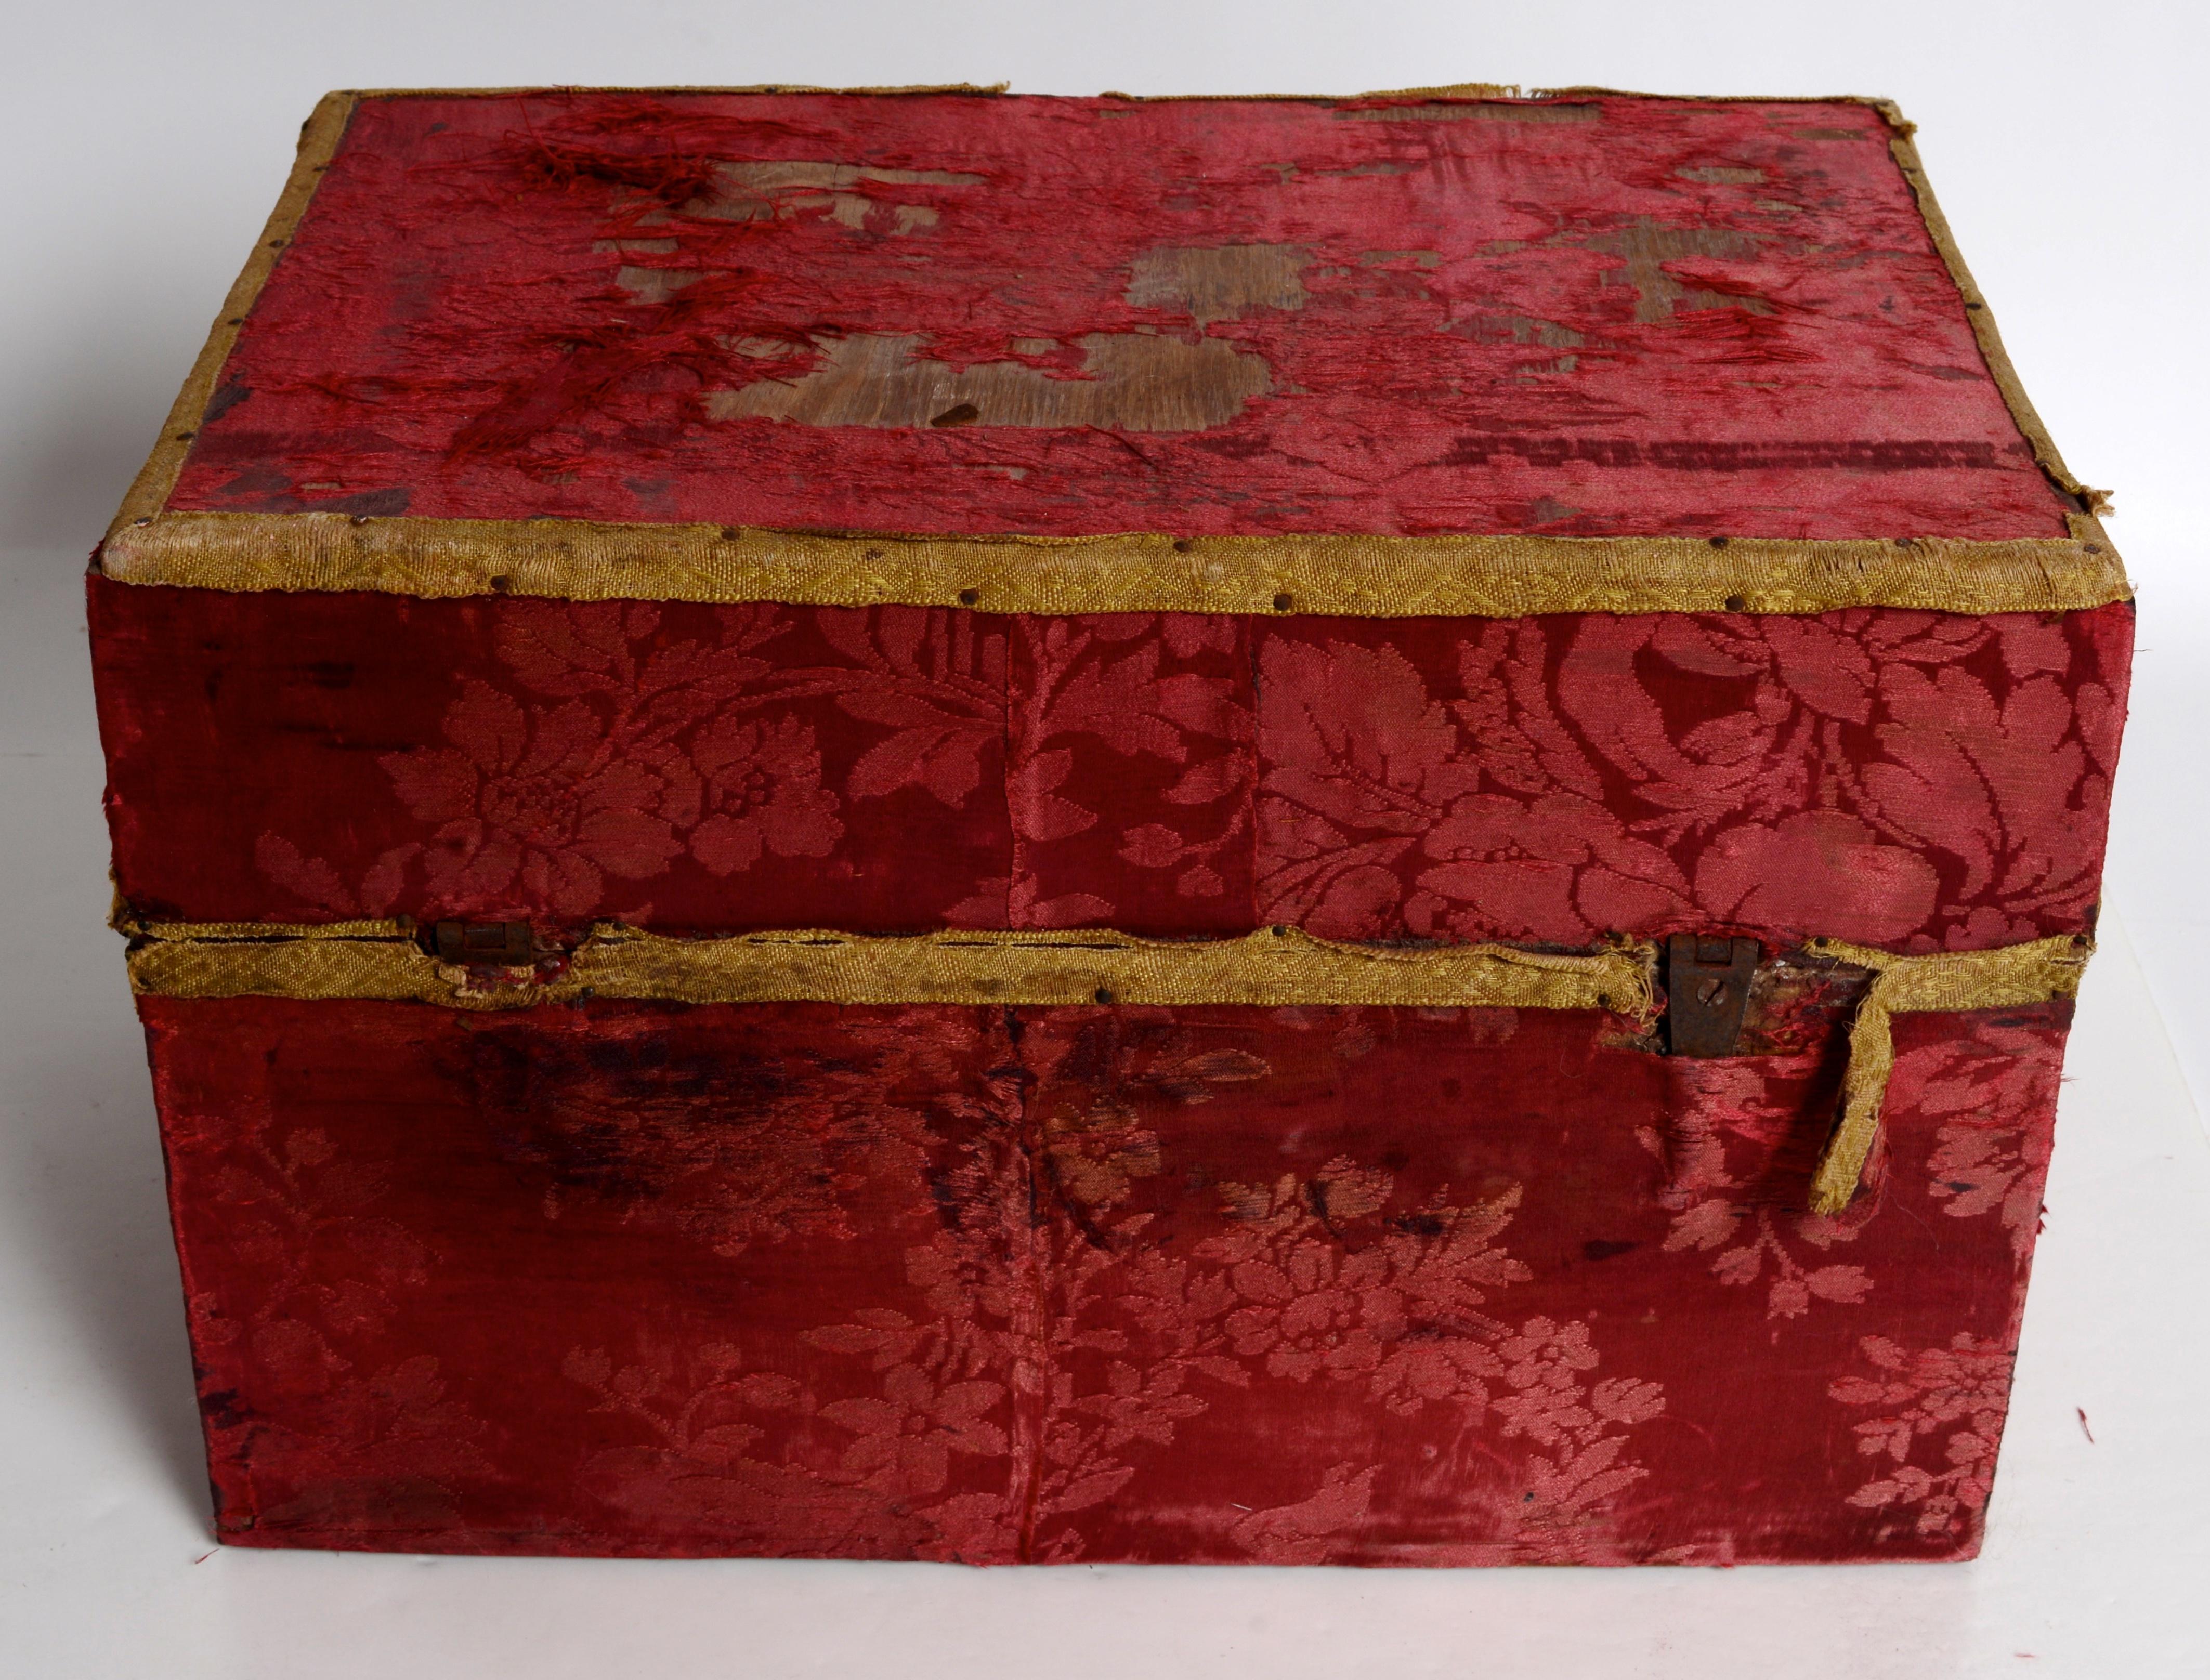 Fitted Traveling Case Original Blown Bottles & Crimson Brocade Cover Late 18th C In Good Condition For Sale In valatie, NY